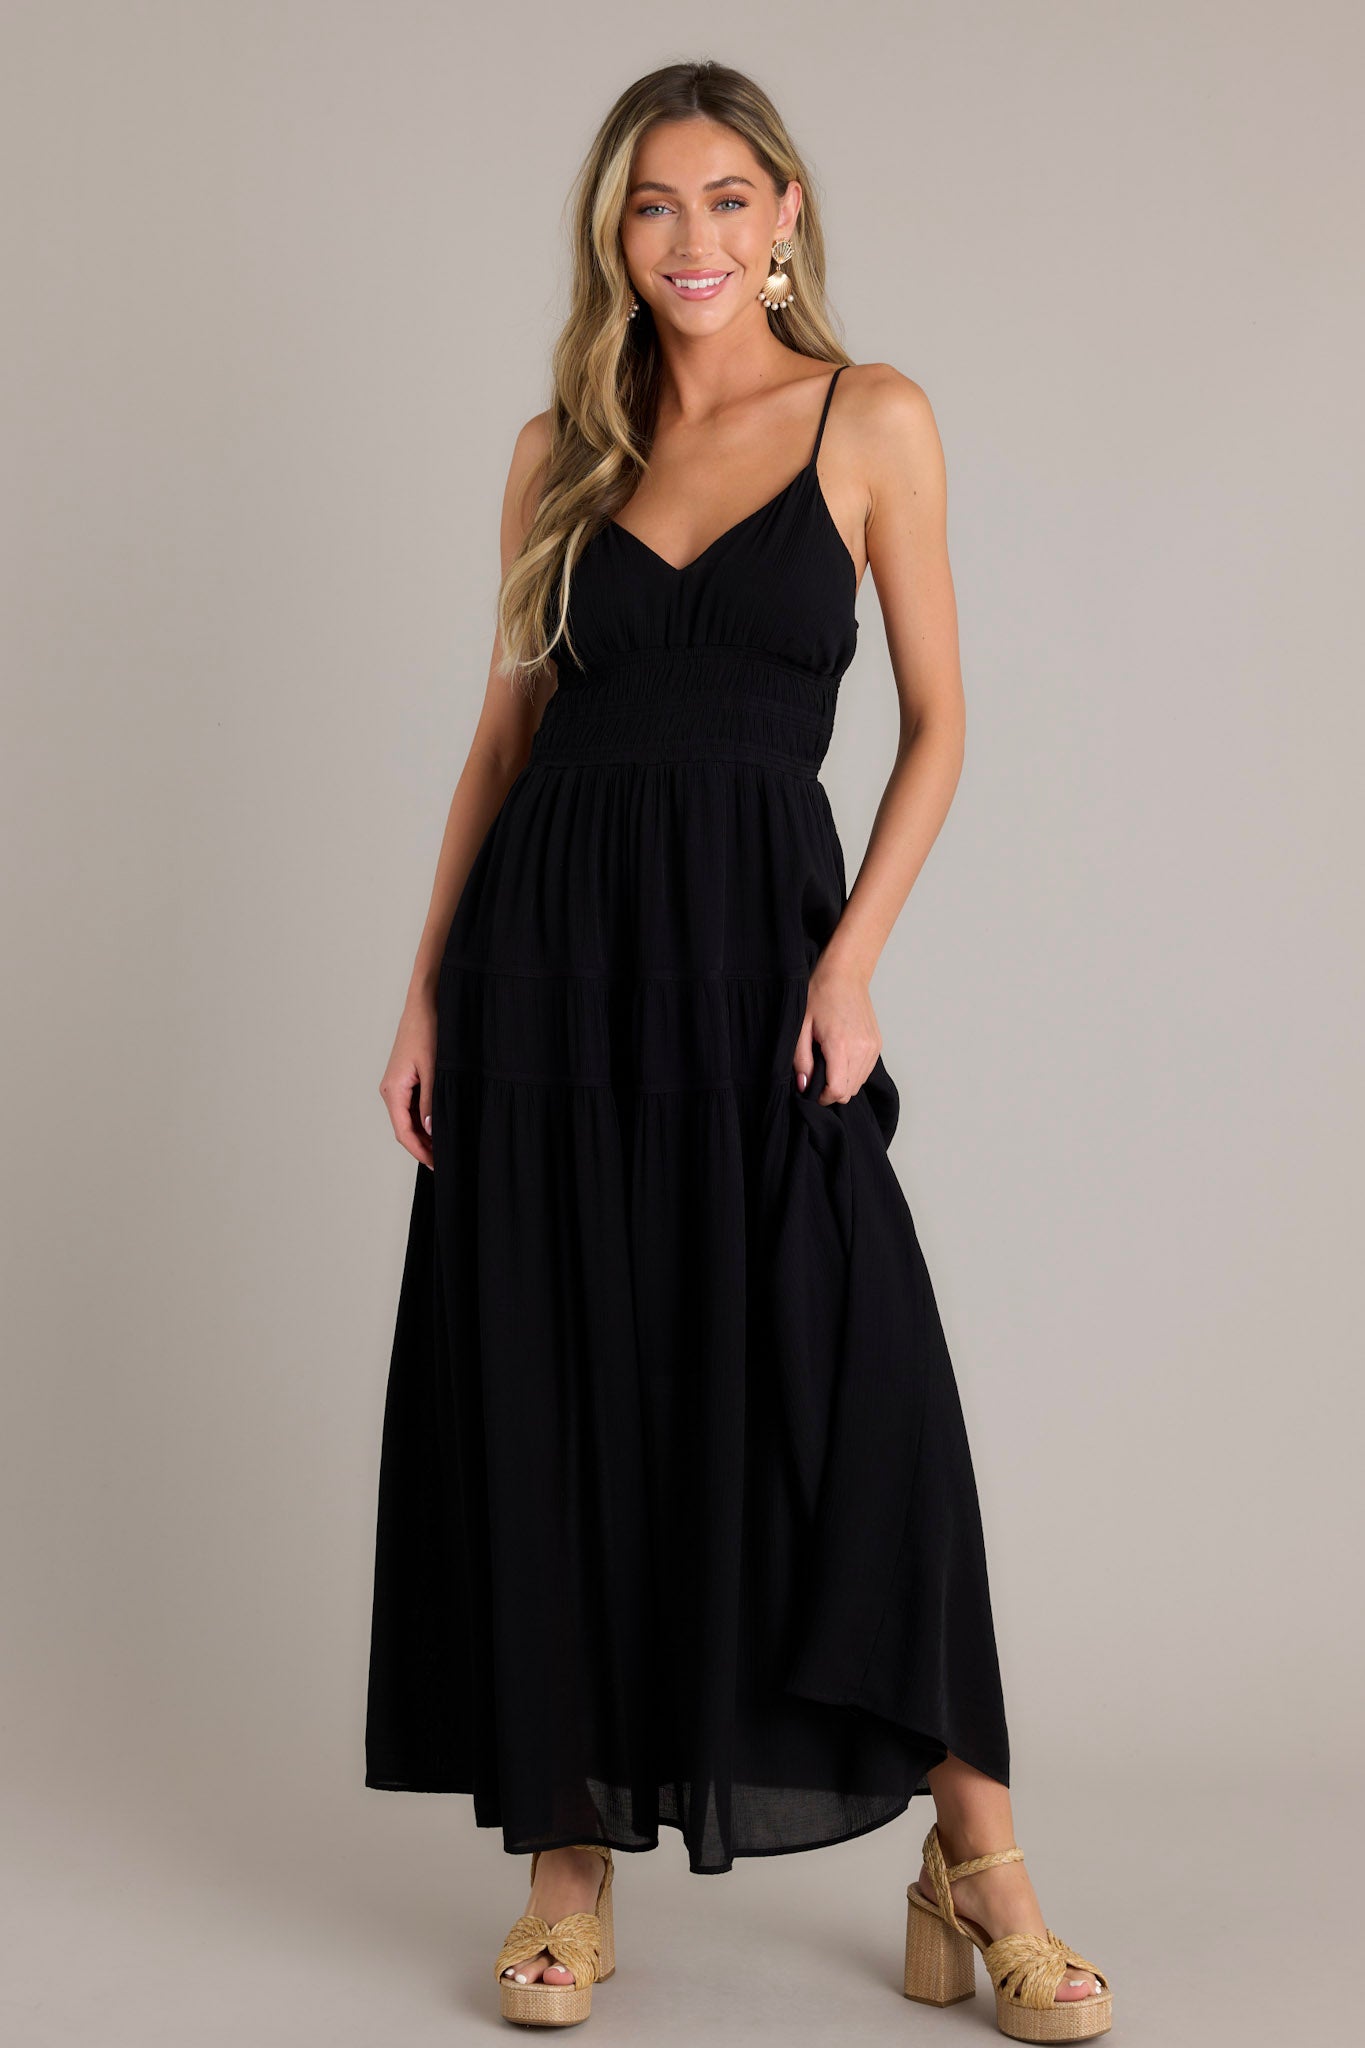 Action shot of a black maxi dress displaying the flow and movement of the fabric, highlighting the v-neckline, thin adjustable straps, open back, fully smocked waist and lower back, tiers, and a flowing silhouette.